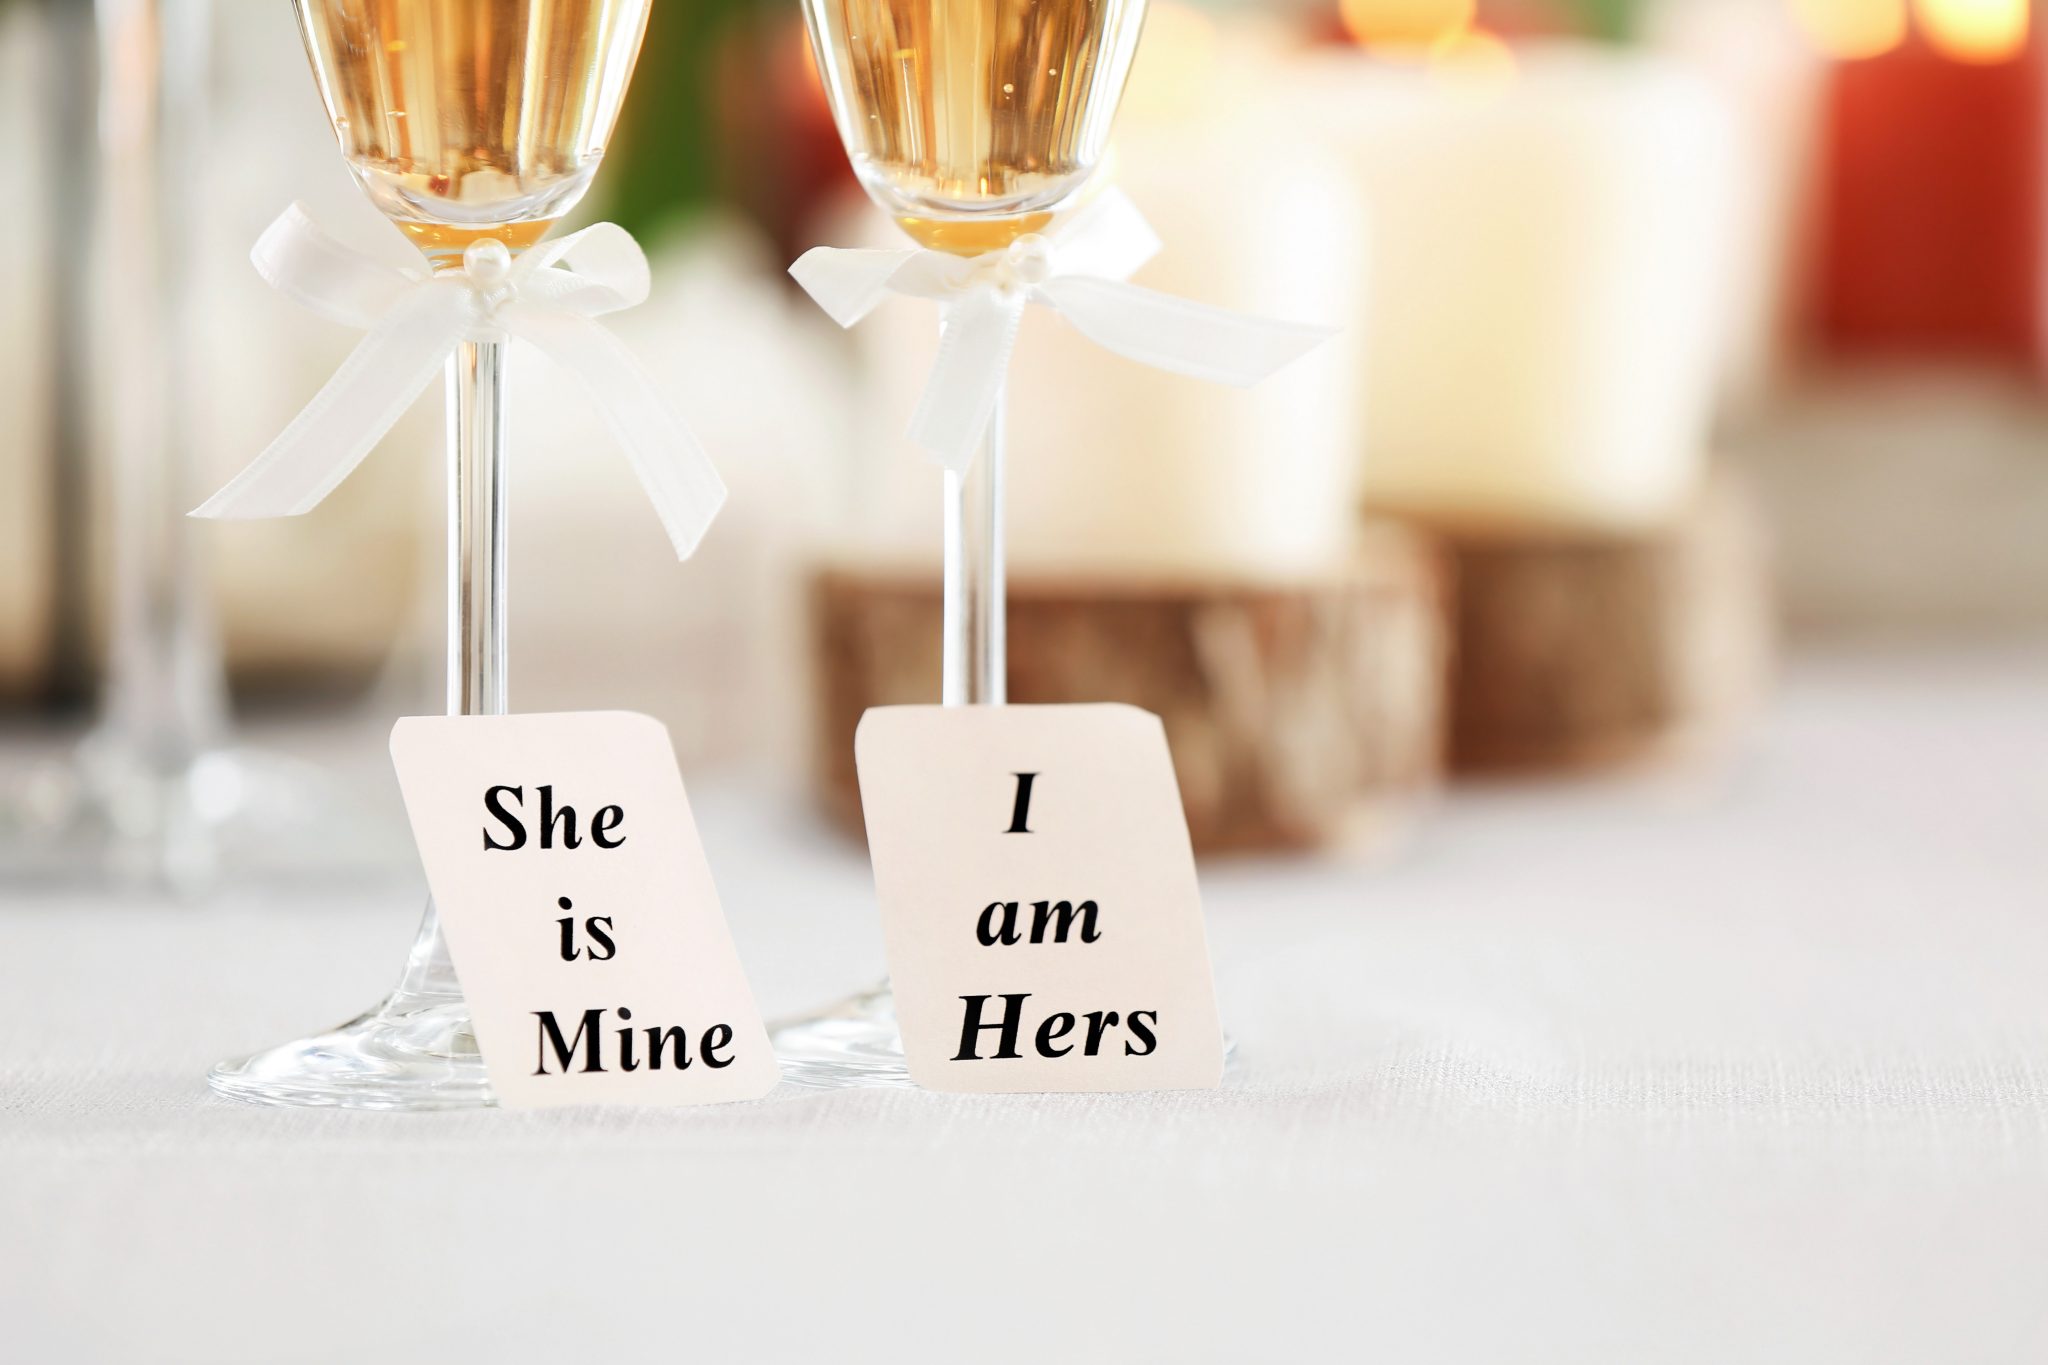 Two champagne glasses with small signs that read 'She is mine' and 'I am hers.'